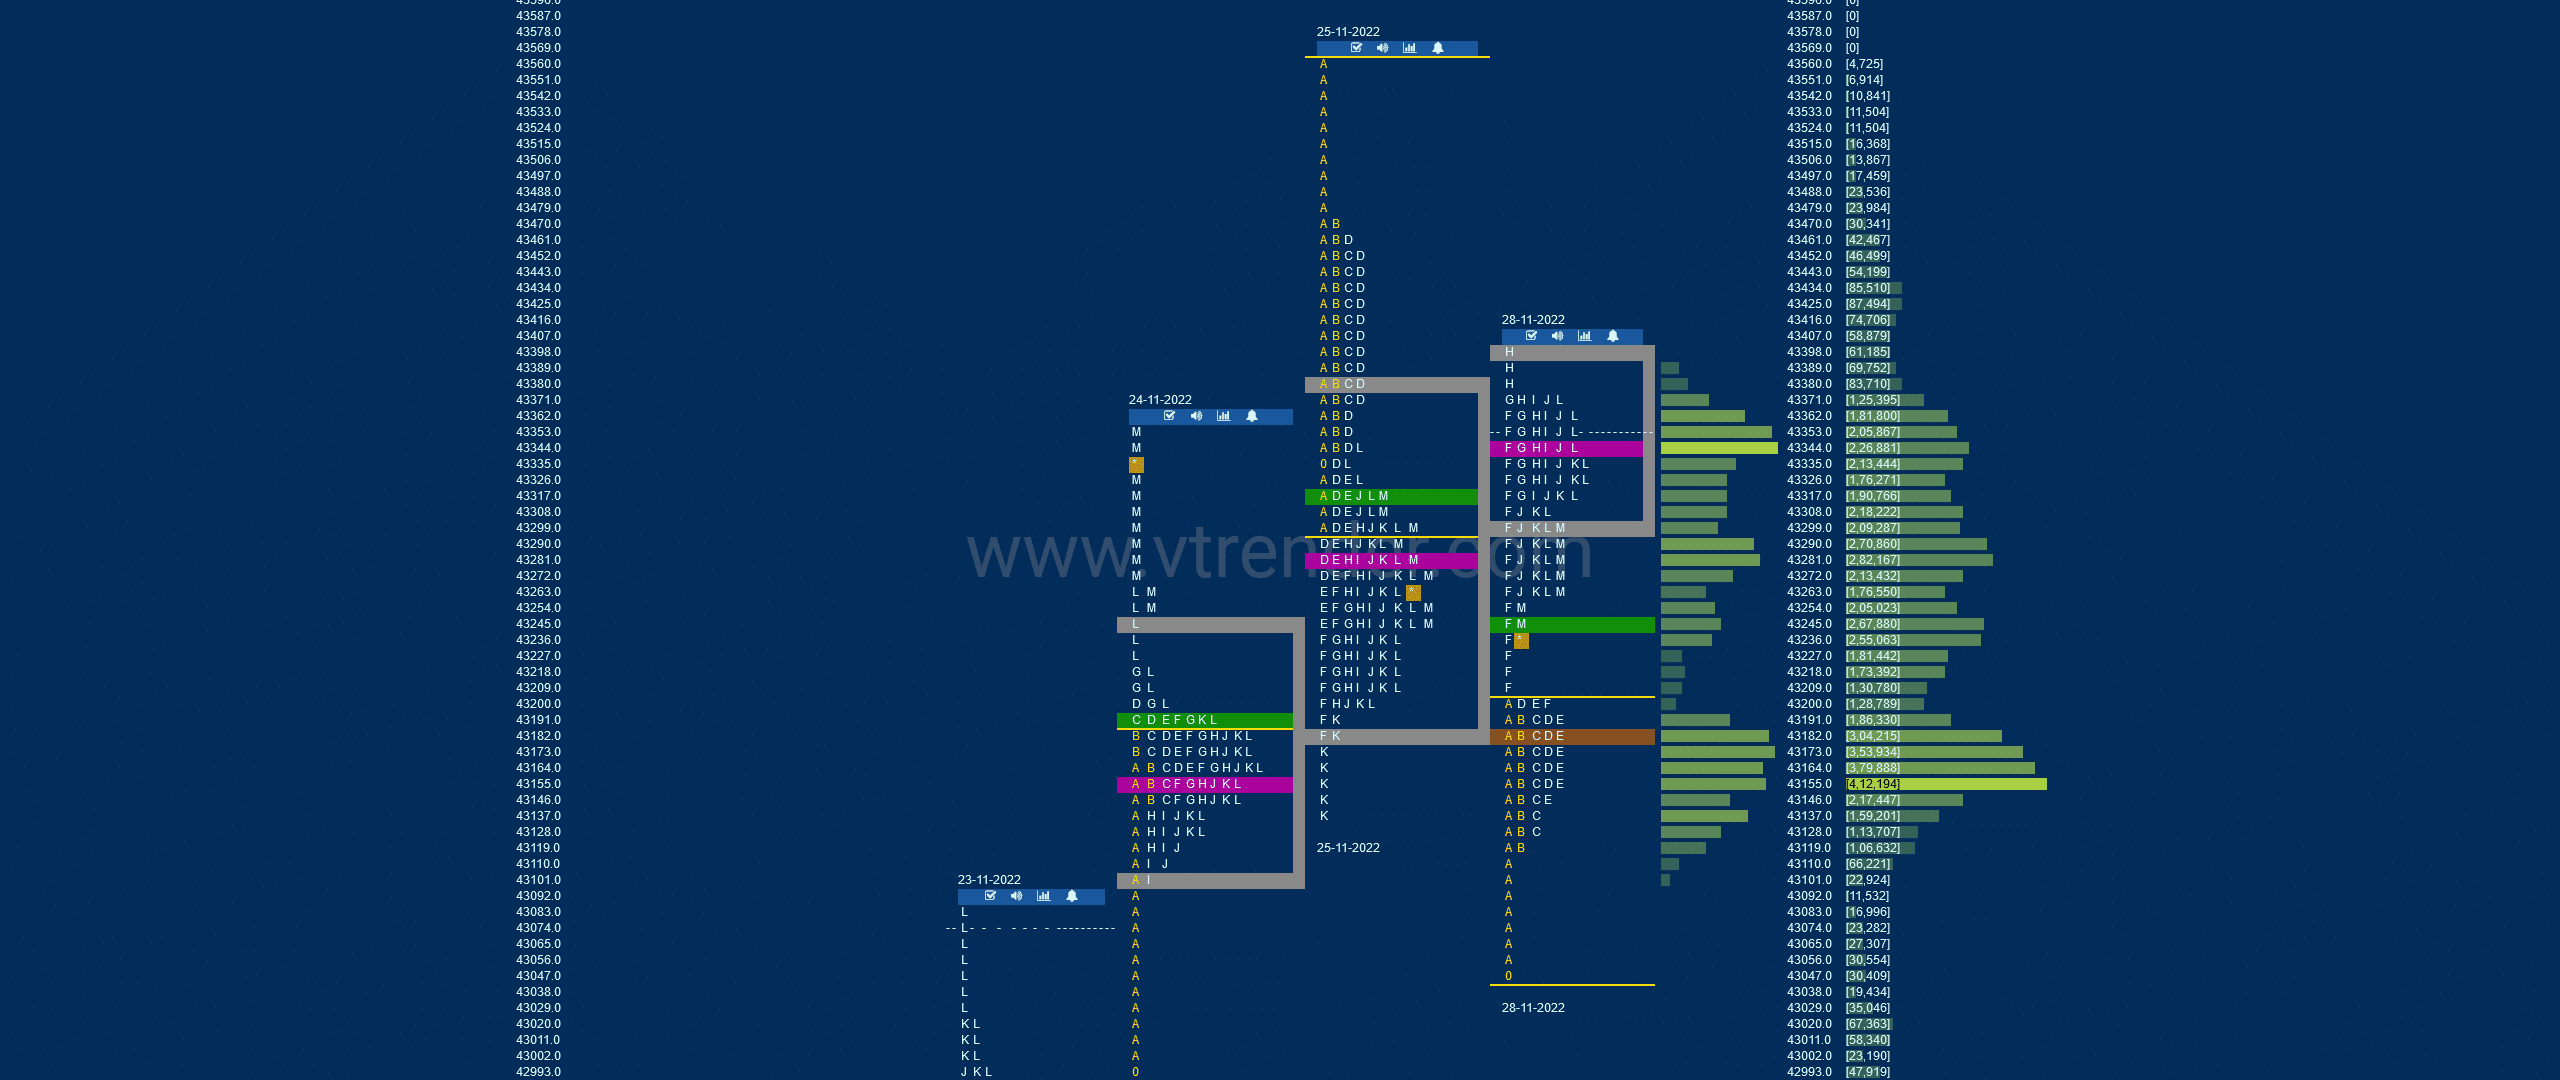 Bnf 19 Market Profile Analysis Dated 28Th Nov 2022 Banknifty Futures, Charts, Day Trading, Intraday Trading, Intraday Trading Strategies, Market Profile, Market Profile Trading Strategies, Nifty Futures, Order Flow Analysis, Support And Resistance, Technical Analysis, Trading Strategies, Volume Profile Trading